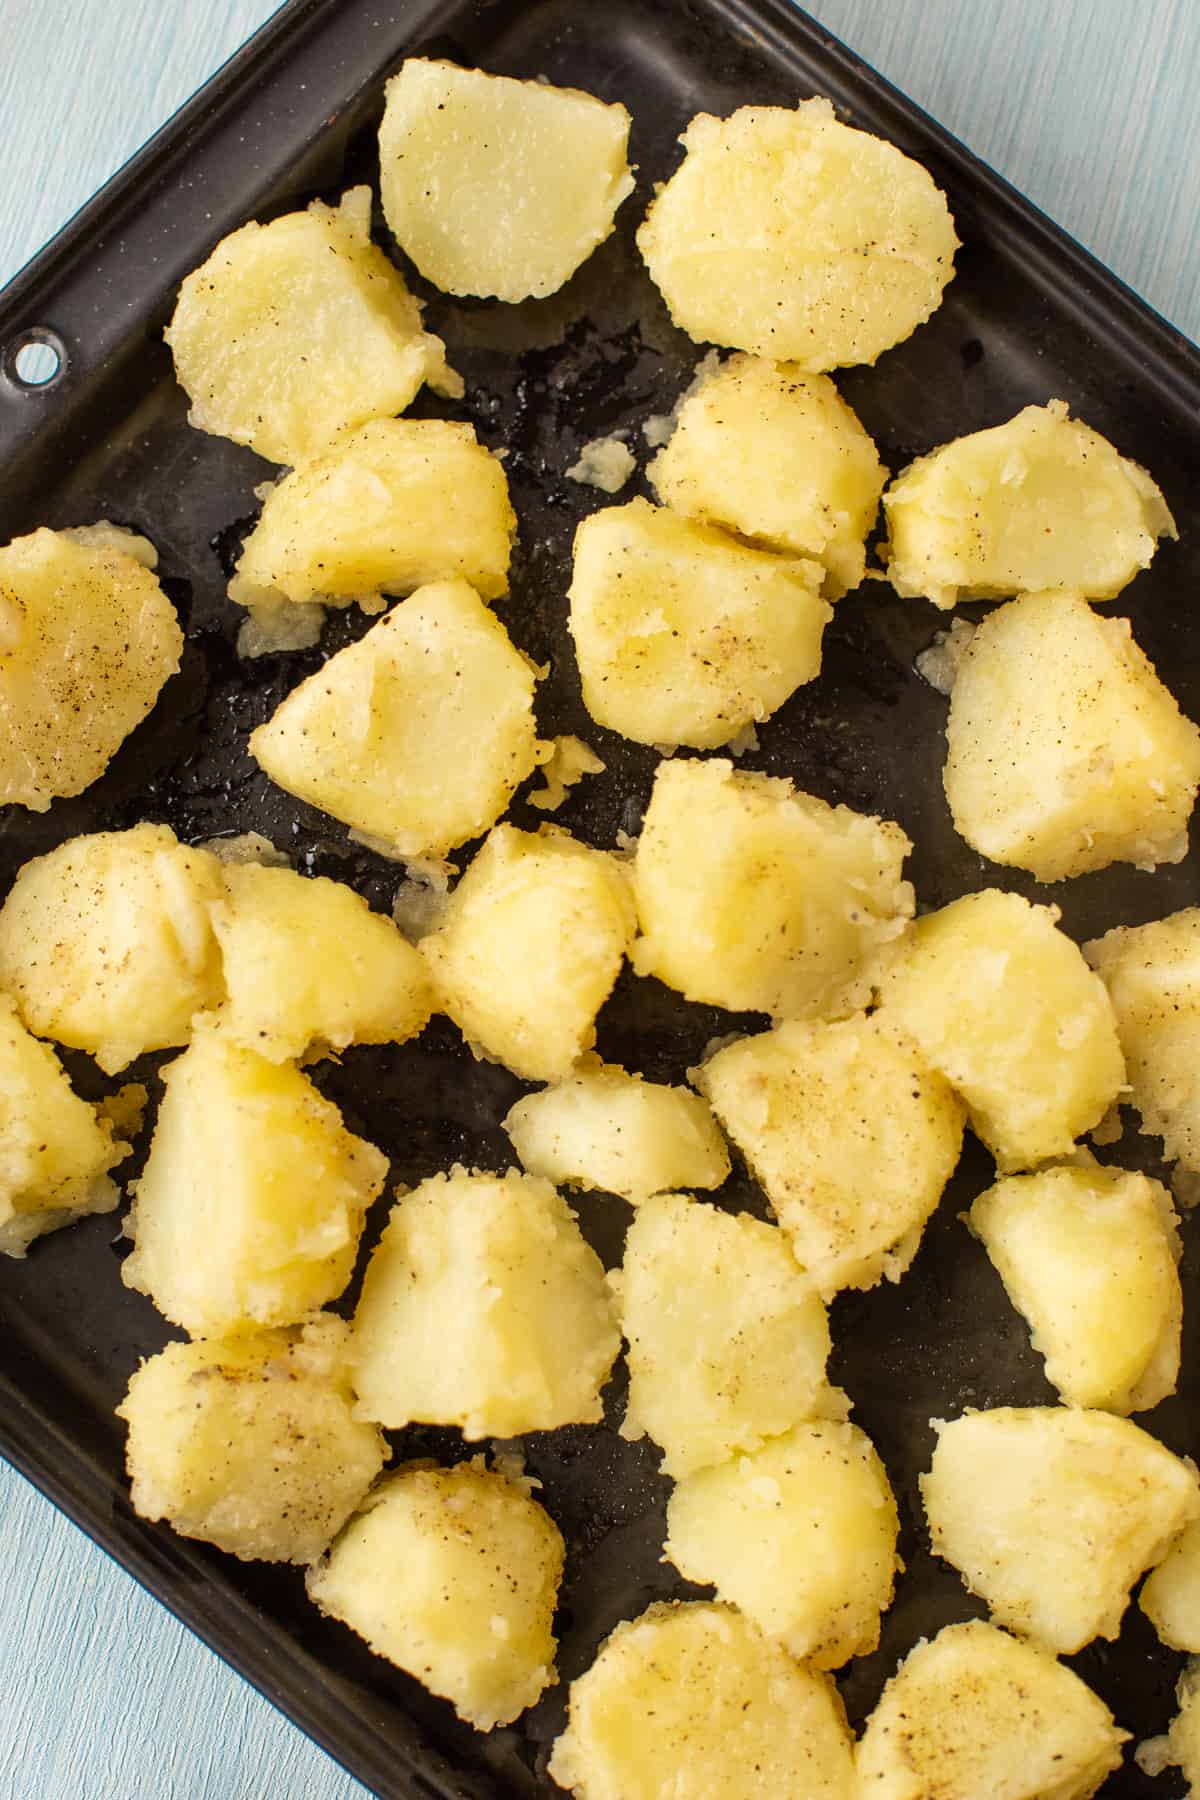 Fluffy boiled potatoes spread out on a baking tray ready to roast.